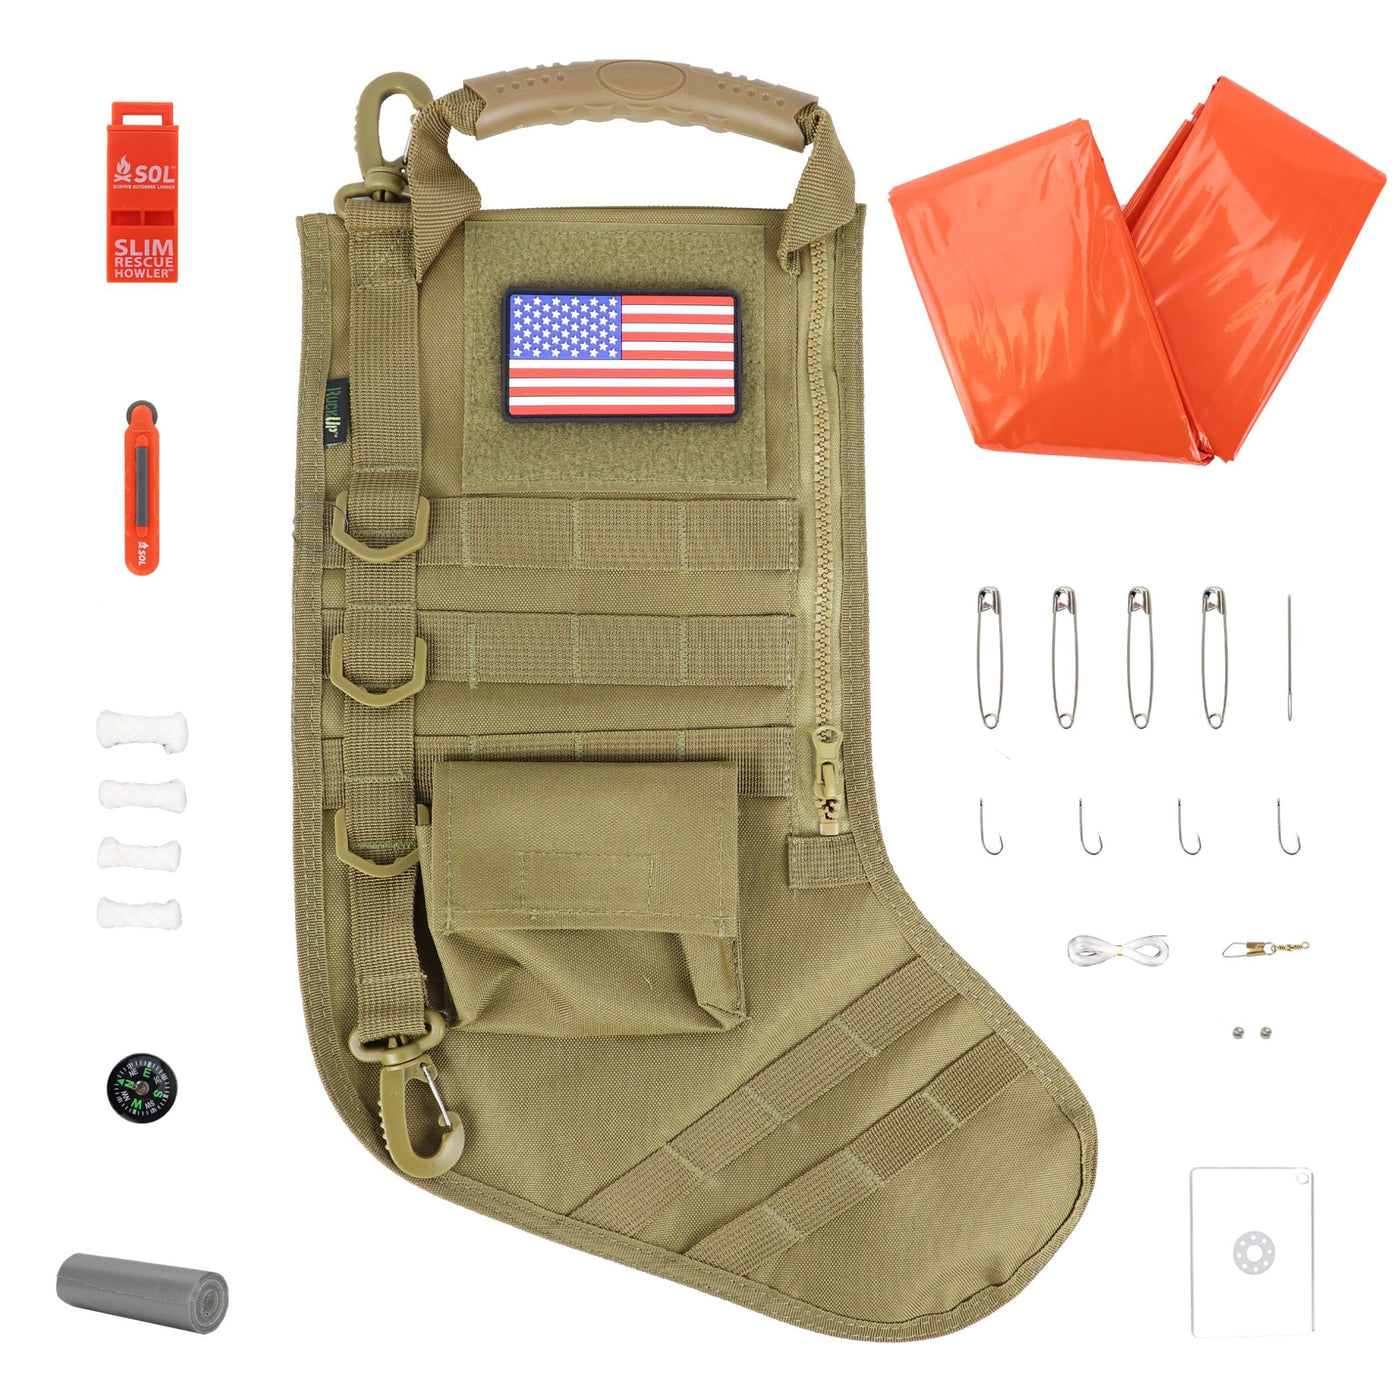 Osage River Osage River Tactical Christmas Stocking Survival Pkg Khaki Gifts And Novelty